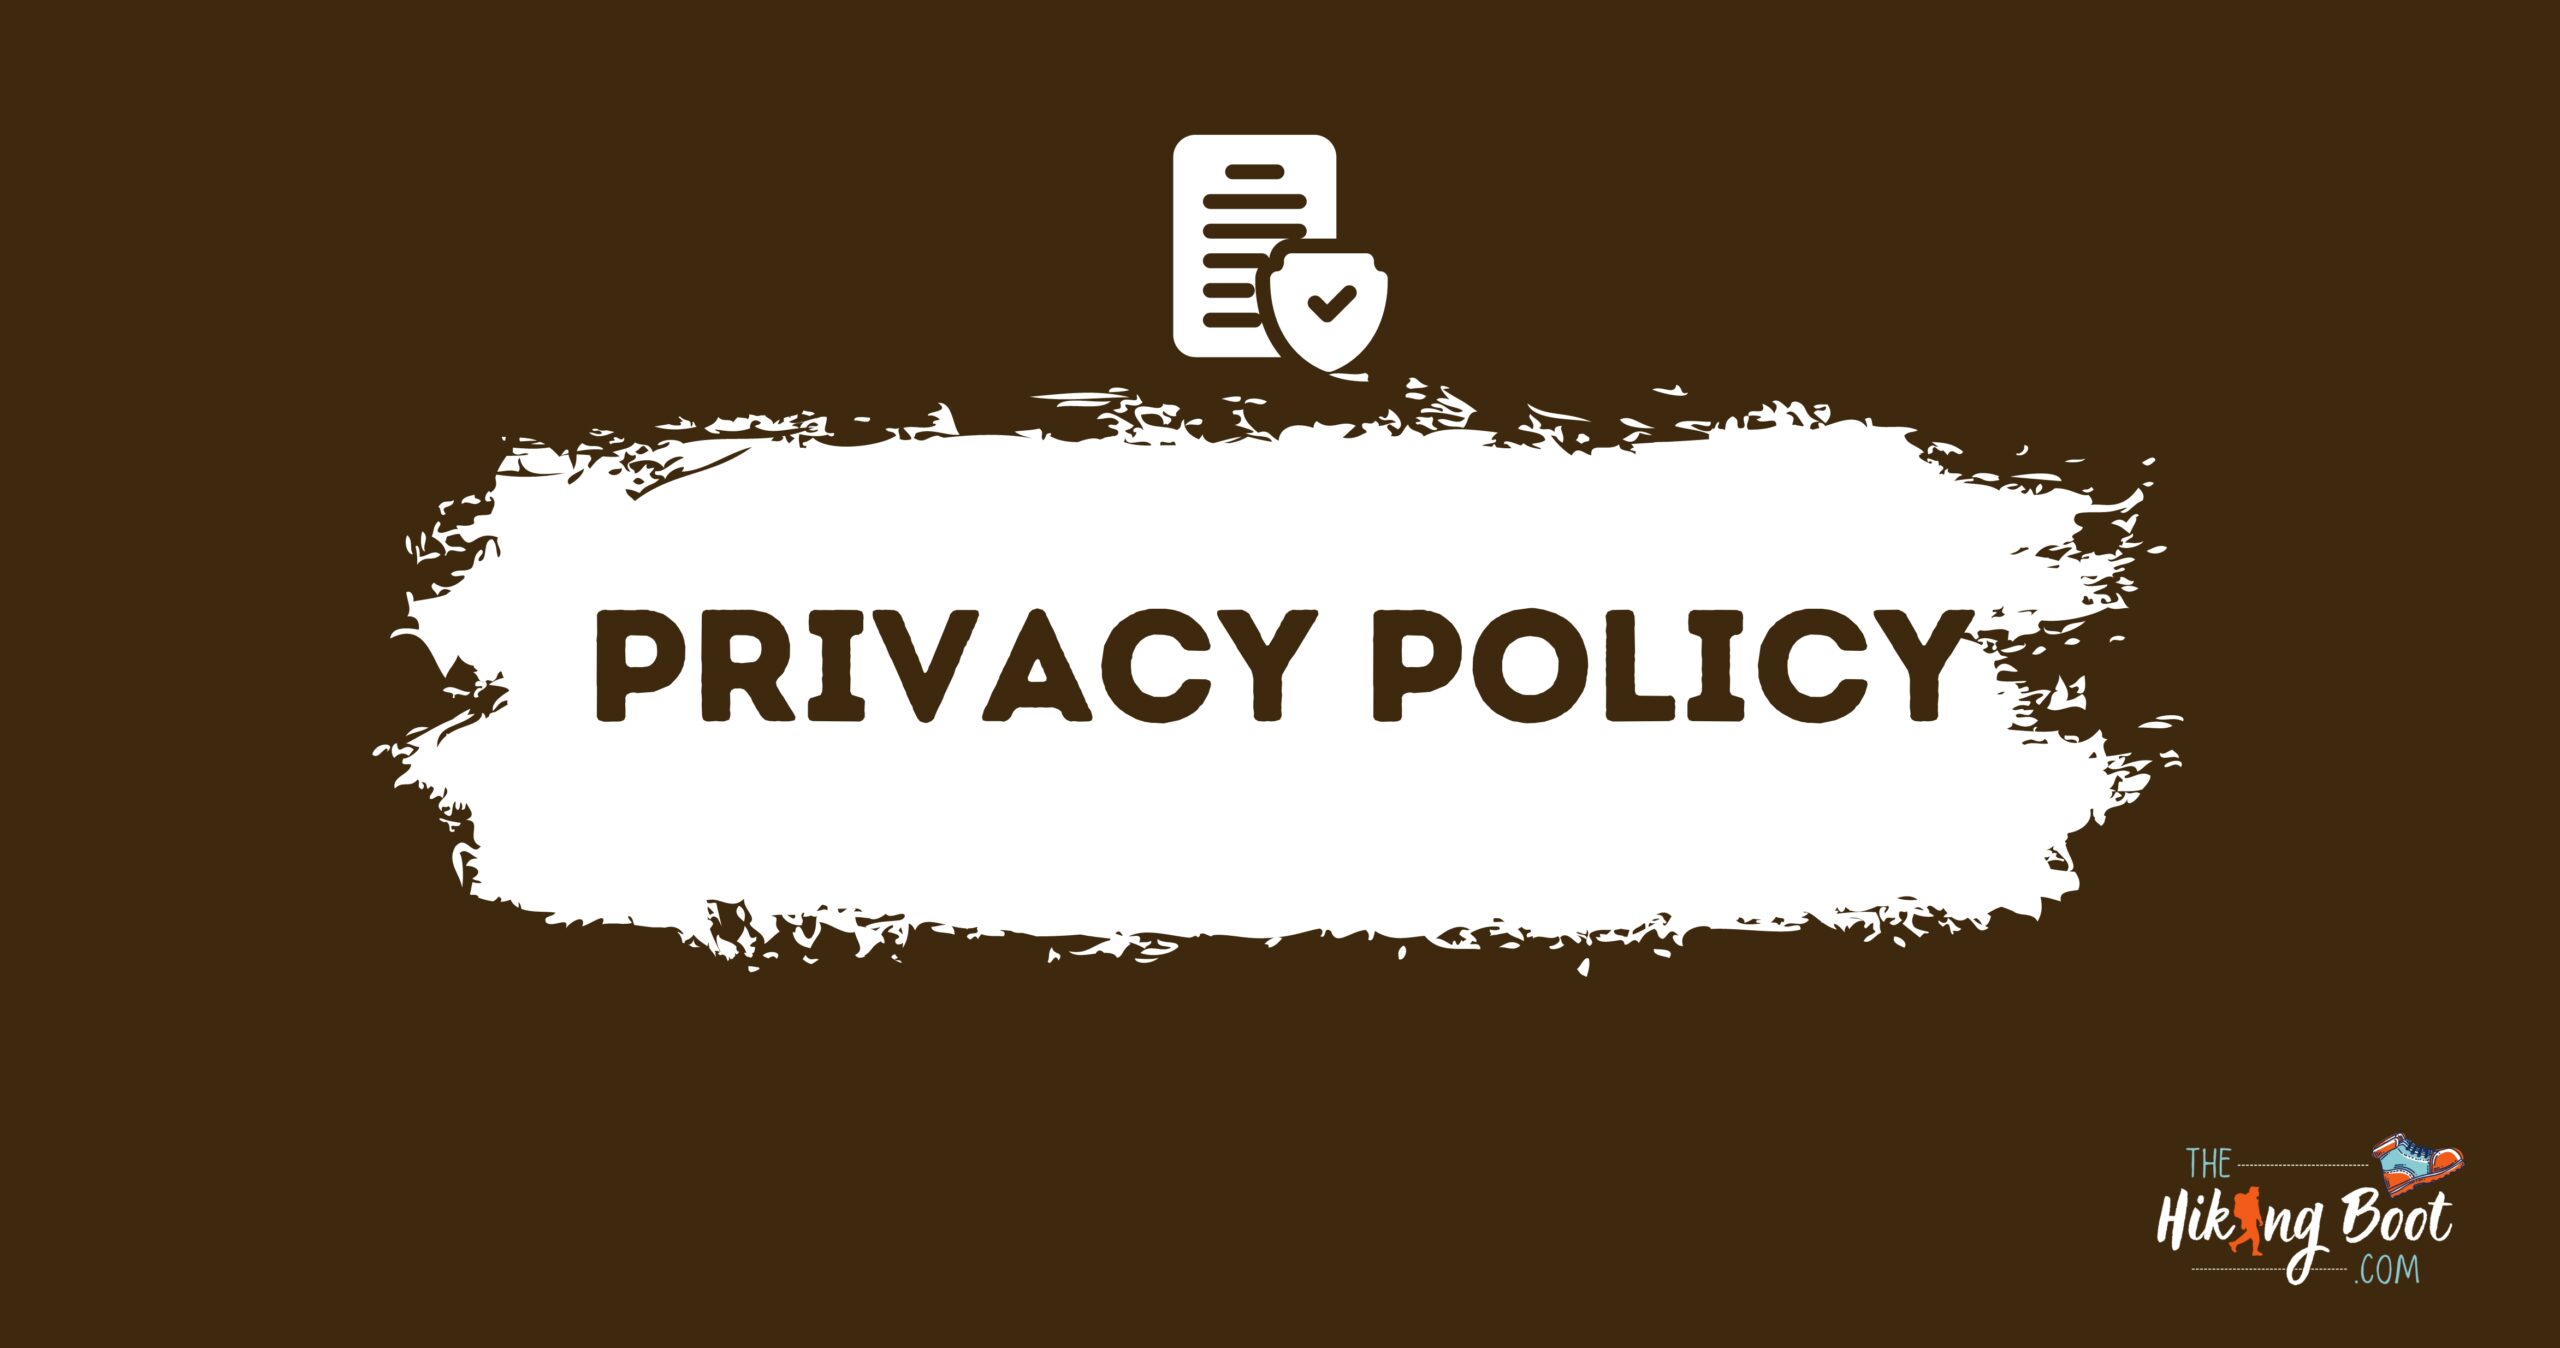 Privacy Policy, The Hiking Boots